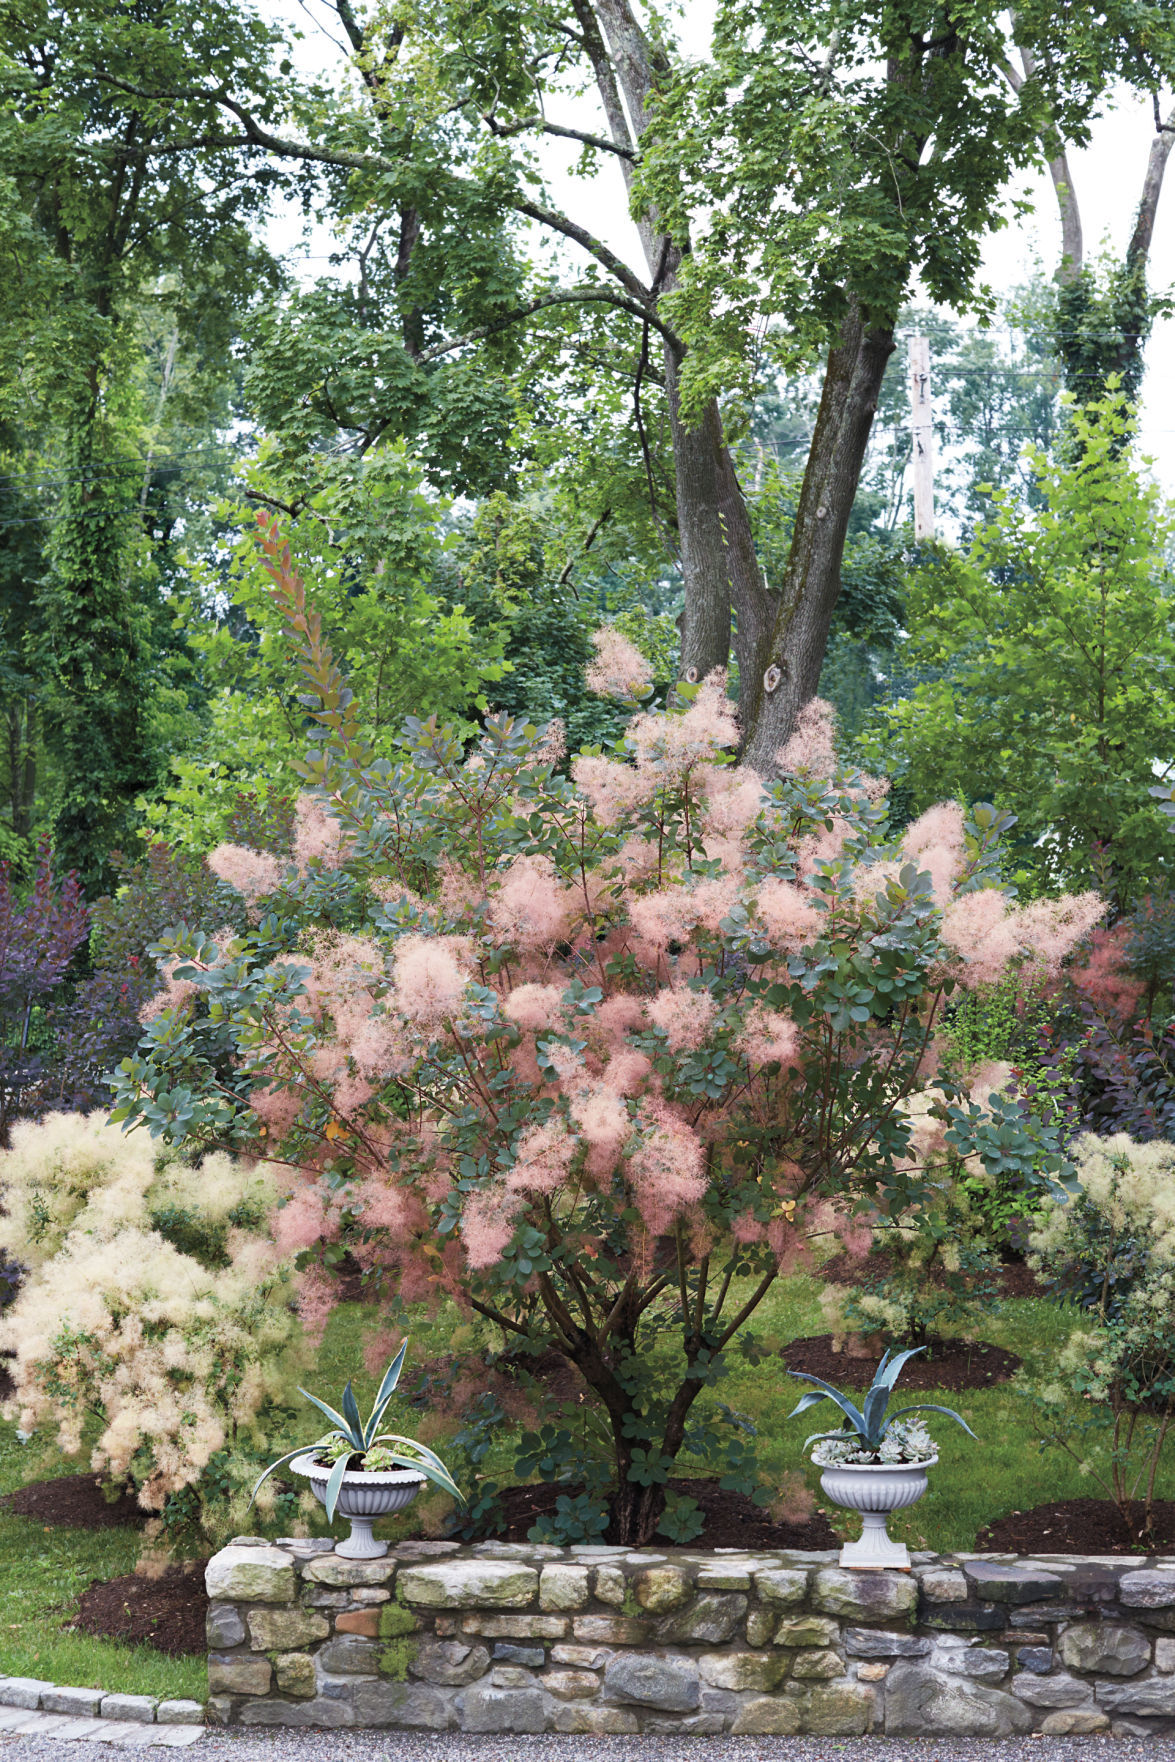 Image of Young Lady Smokebush in a garden setting